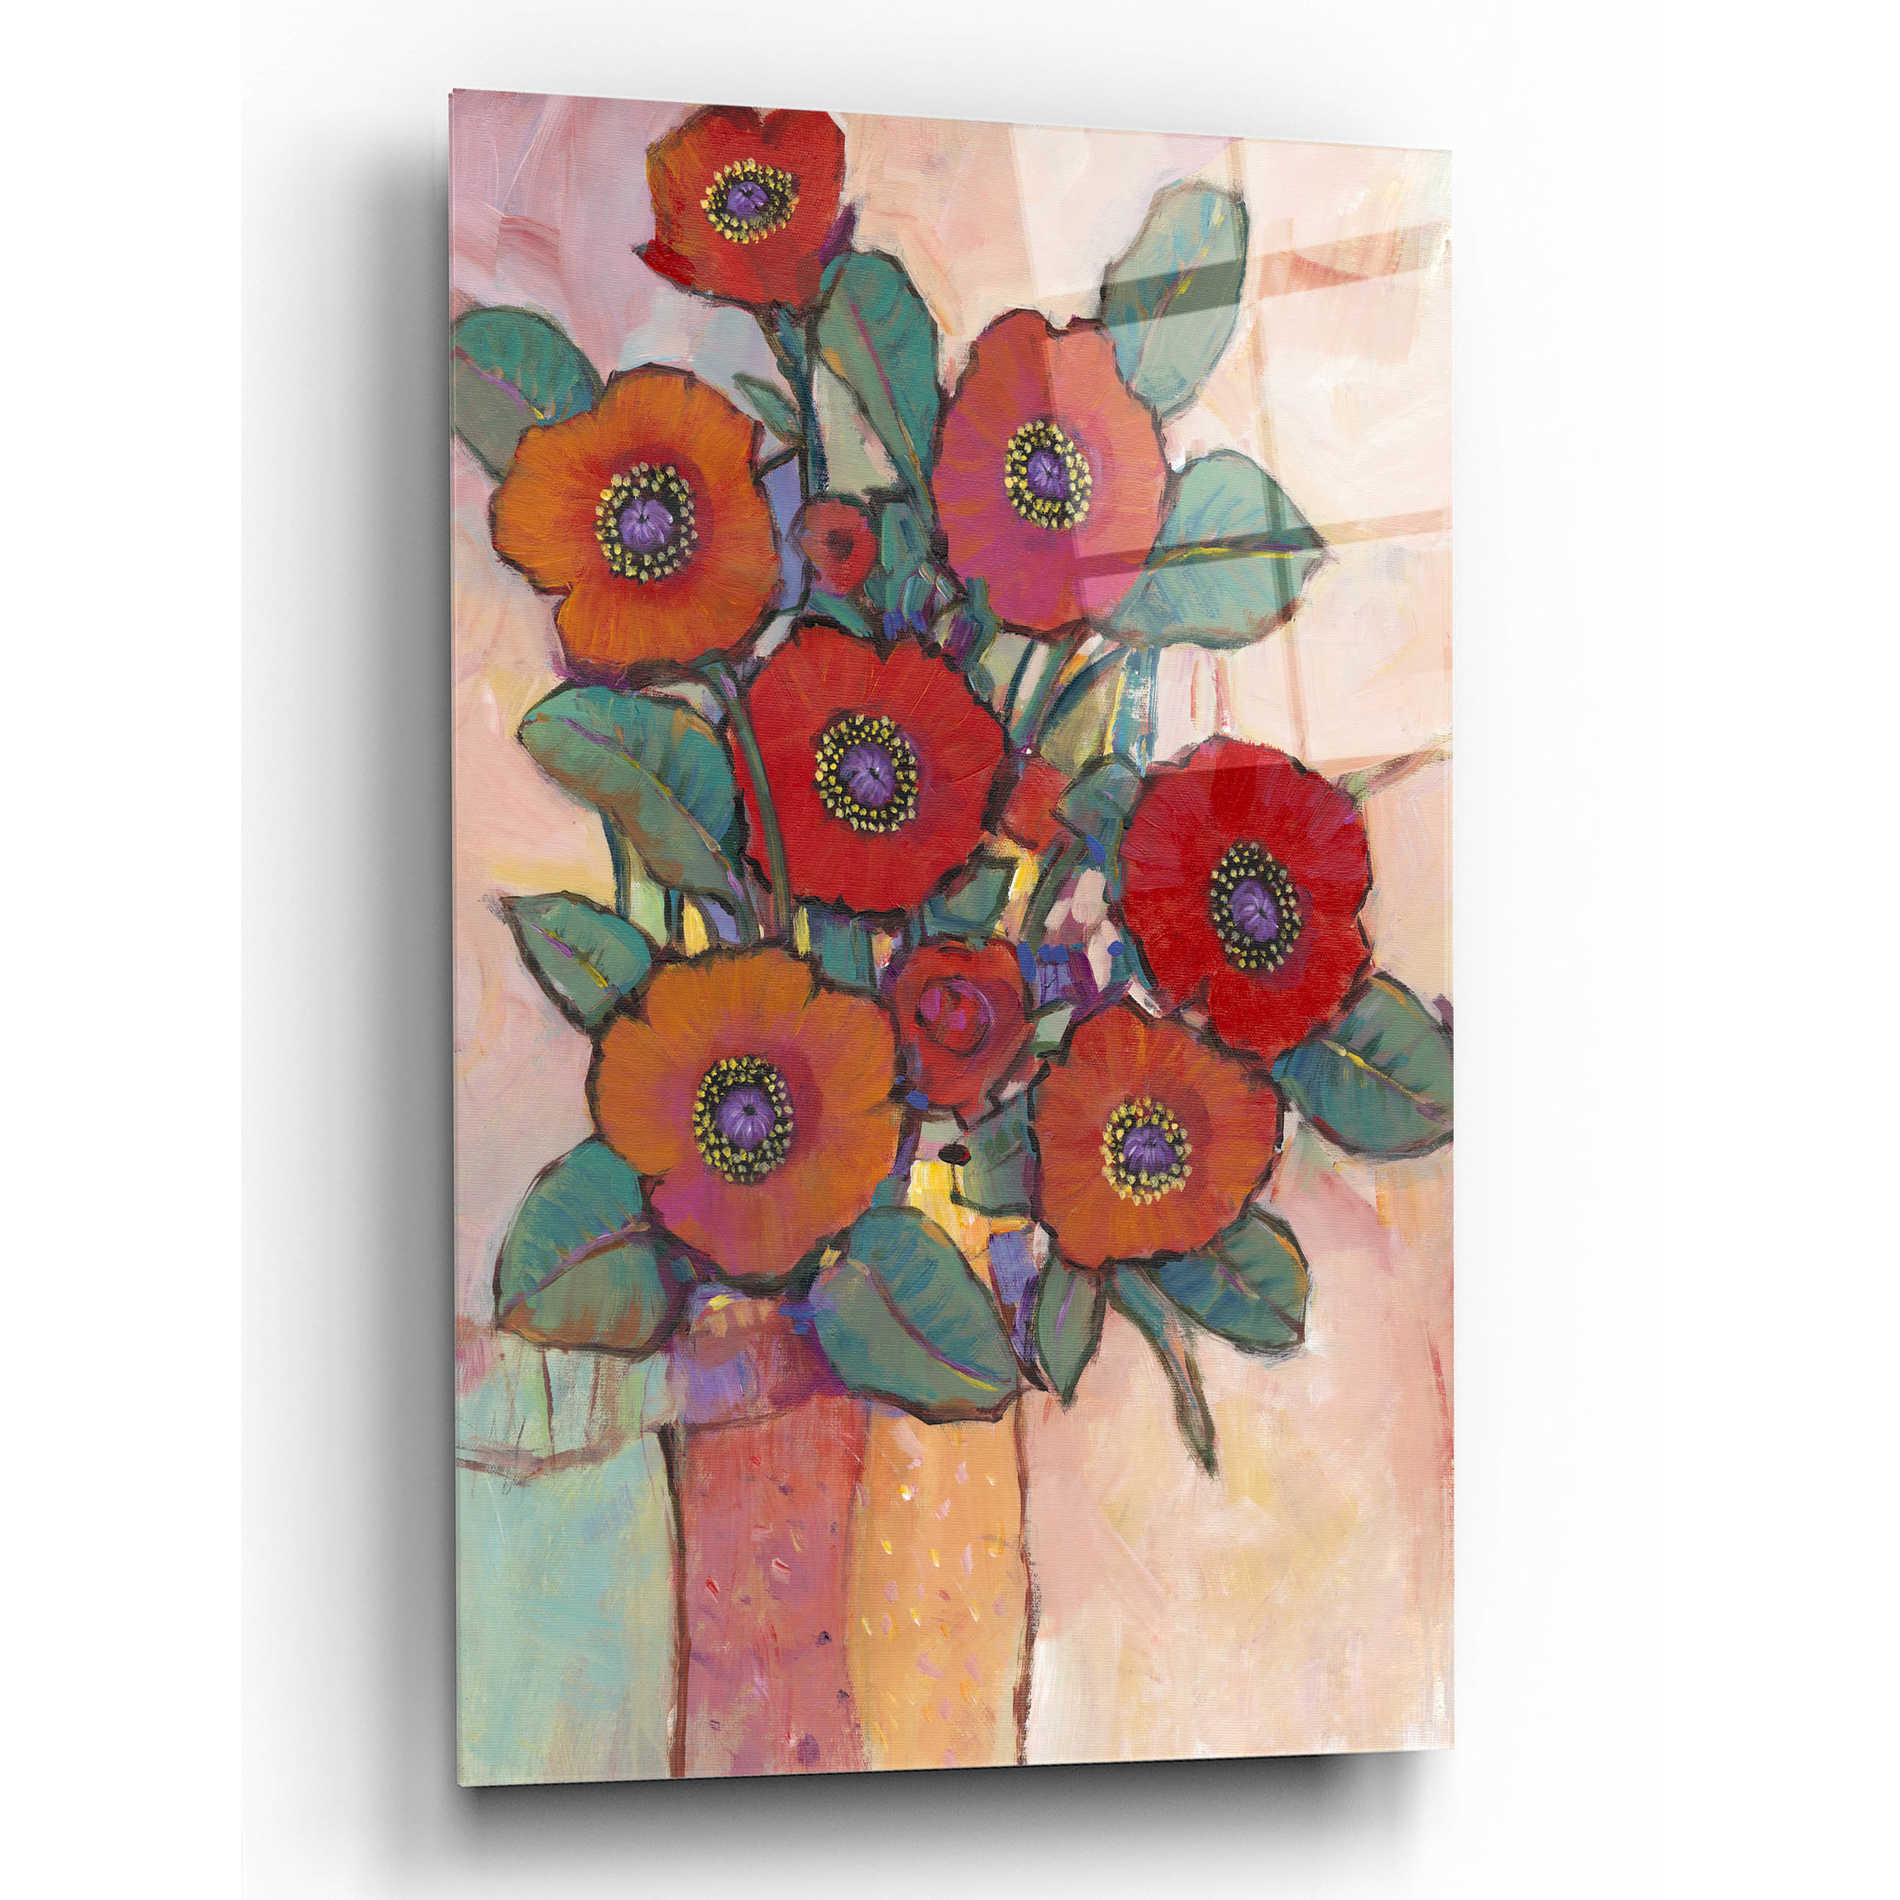 Epic Art 'Poppies in a Vase I' by Tim O'Toole, Acrylic Glass Wall Art,16x24